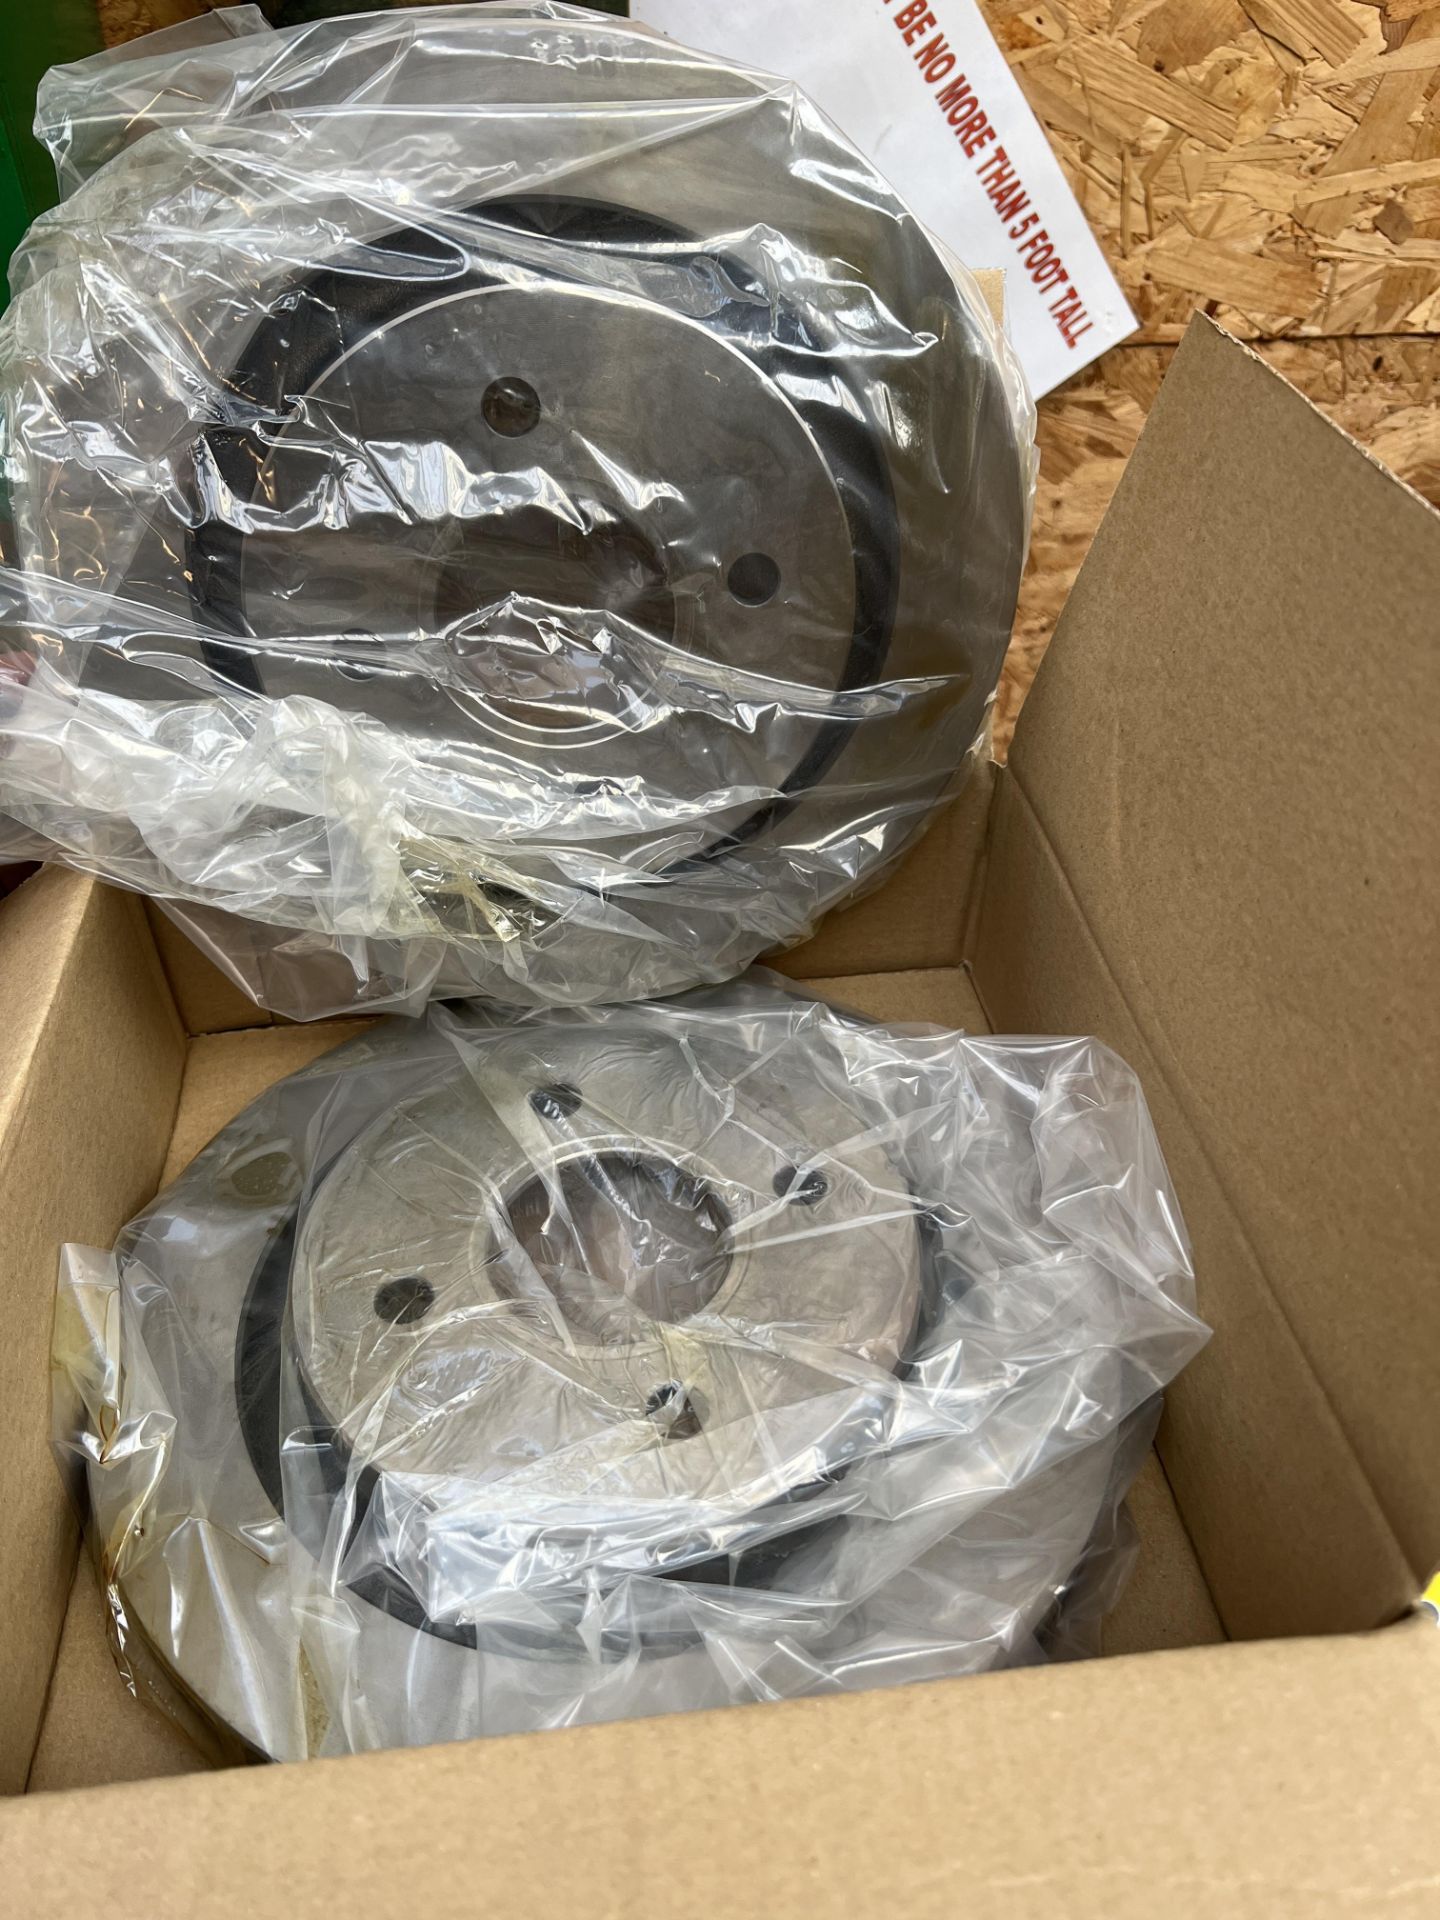 9: Boxed Autonational Vented Rear Brake Discs for Ford Escort RS Cosworth - OE Number: 5024175 & - Image 4 of 5